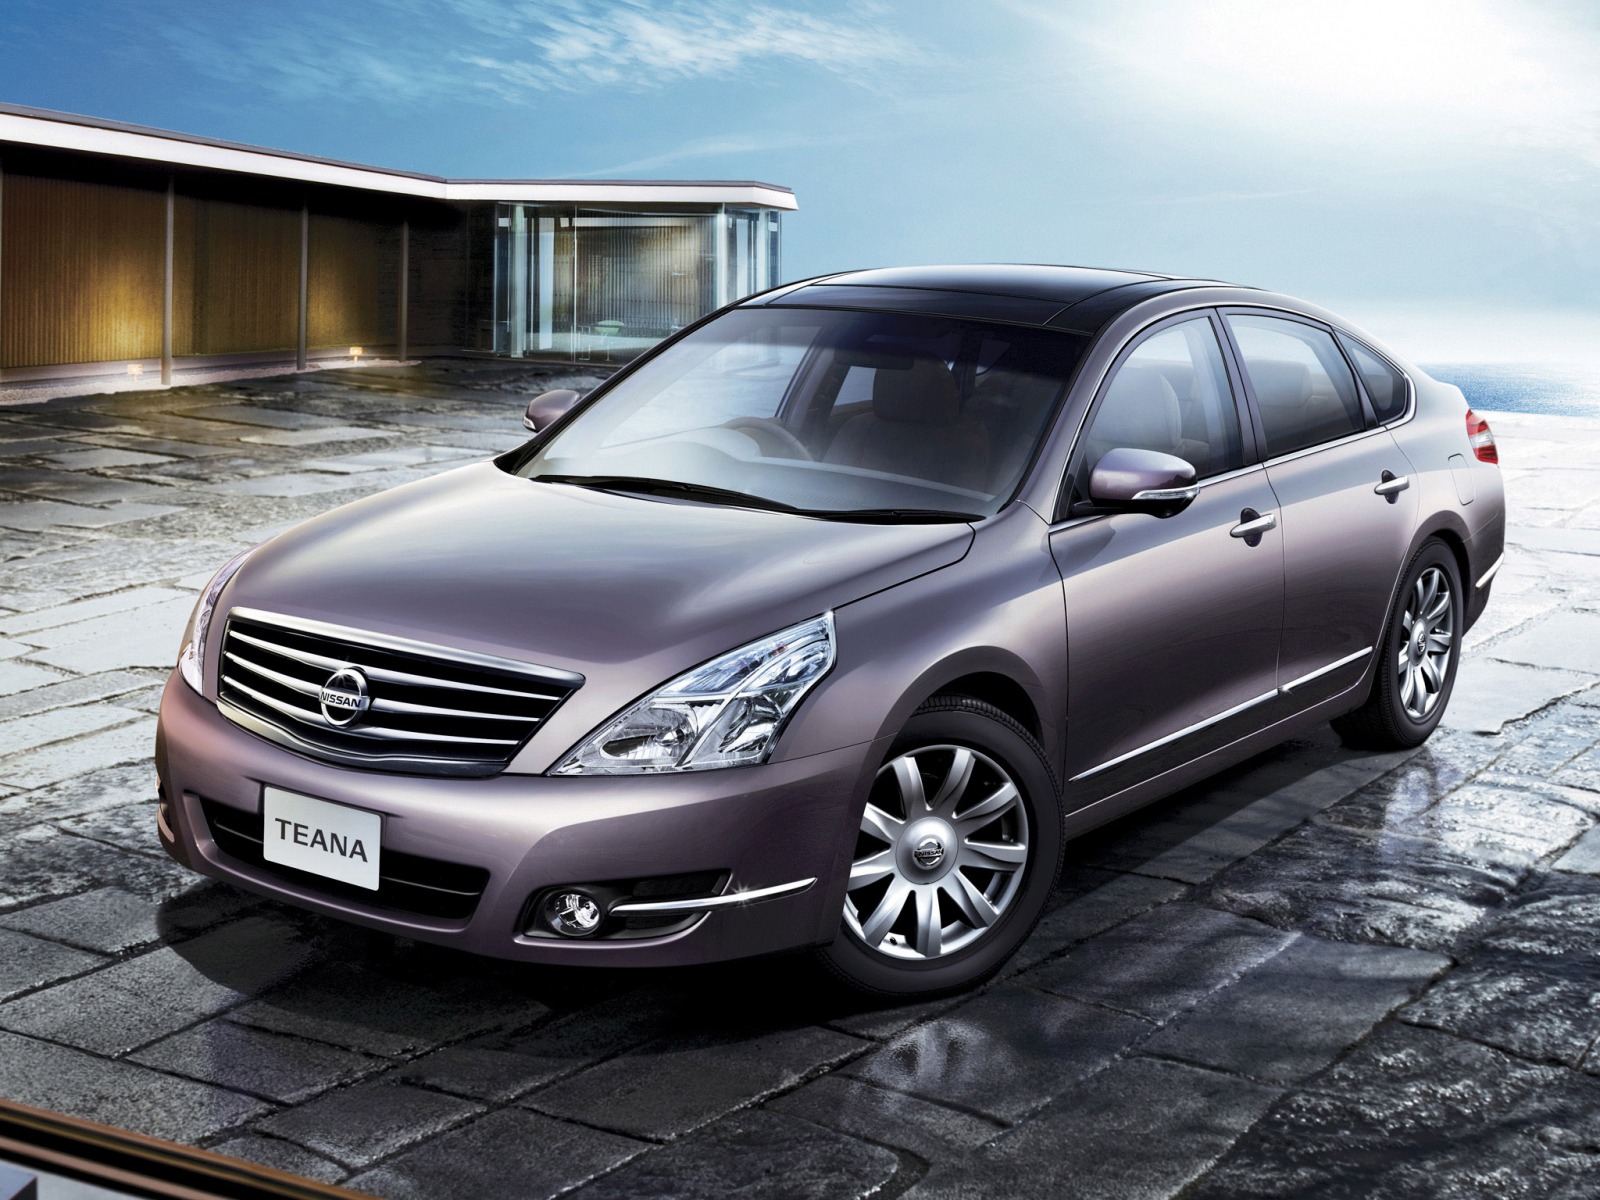 Nissan Teana 2013 Luxury Sedan, 4 doors with Airbags, ABS And Traction ...